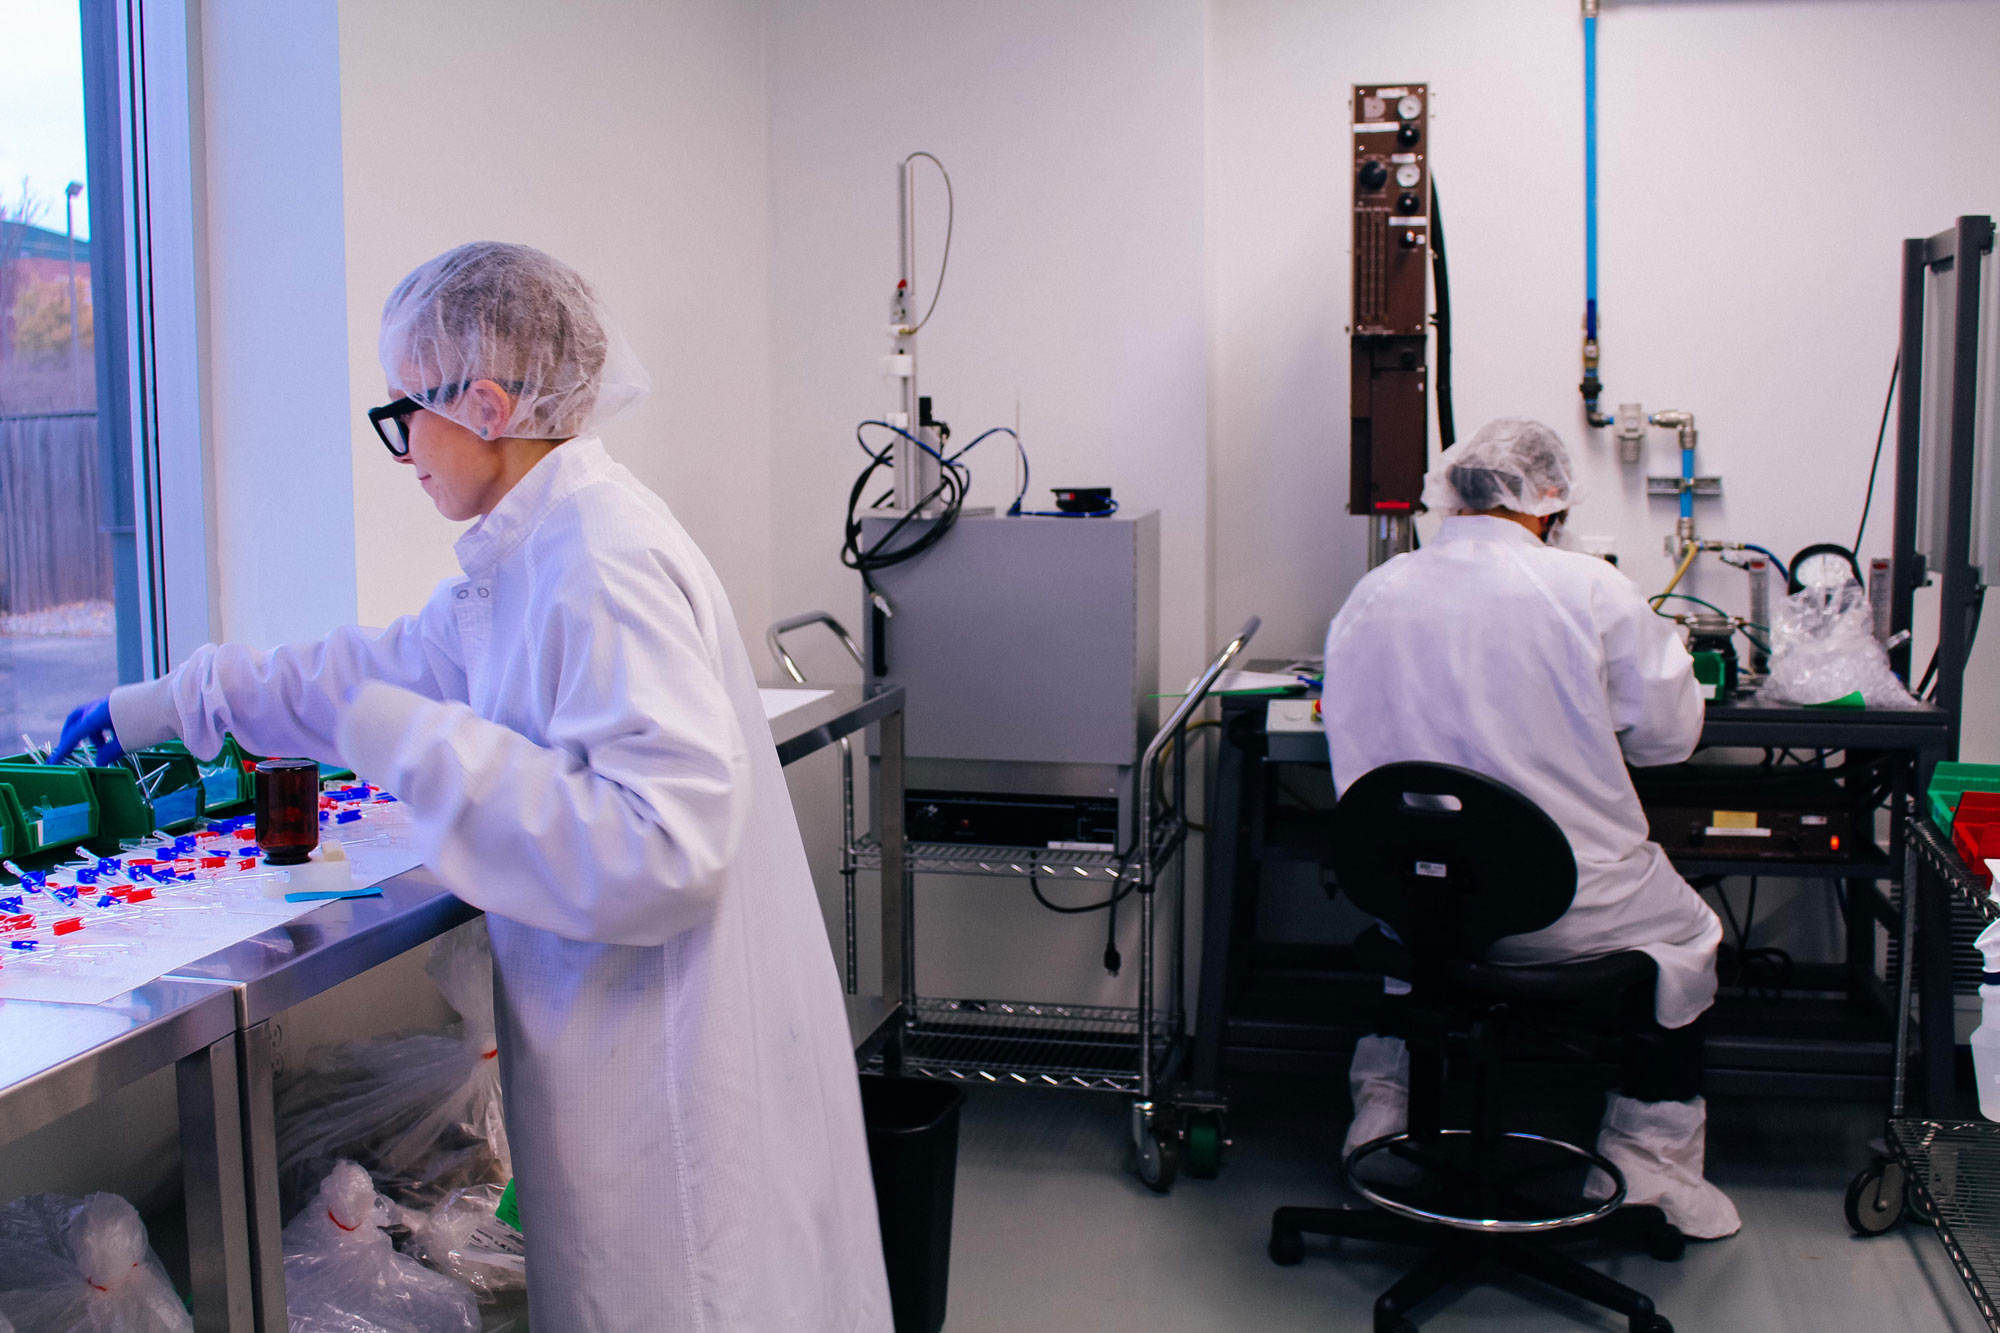 An image of lab workers closing out their day in the iso class 7 cleanroom.